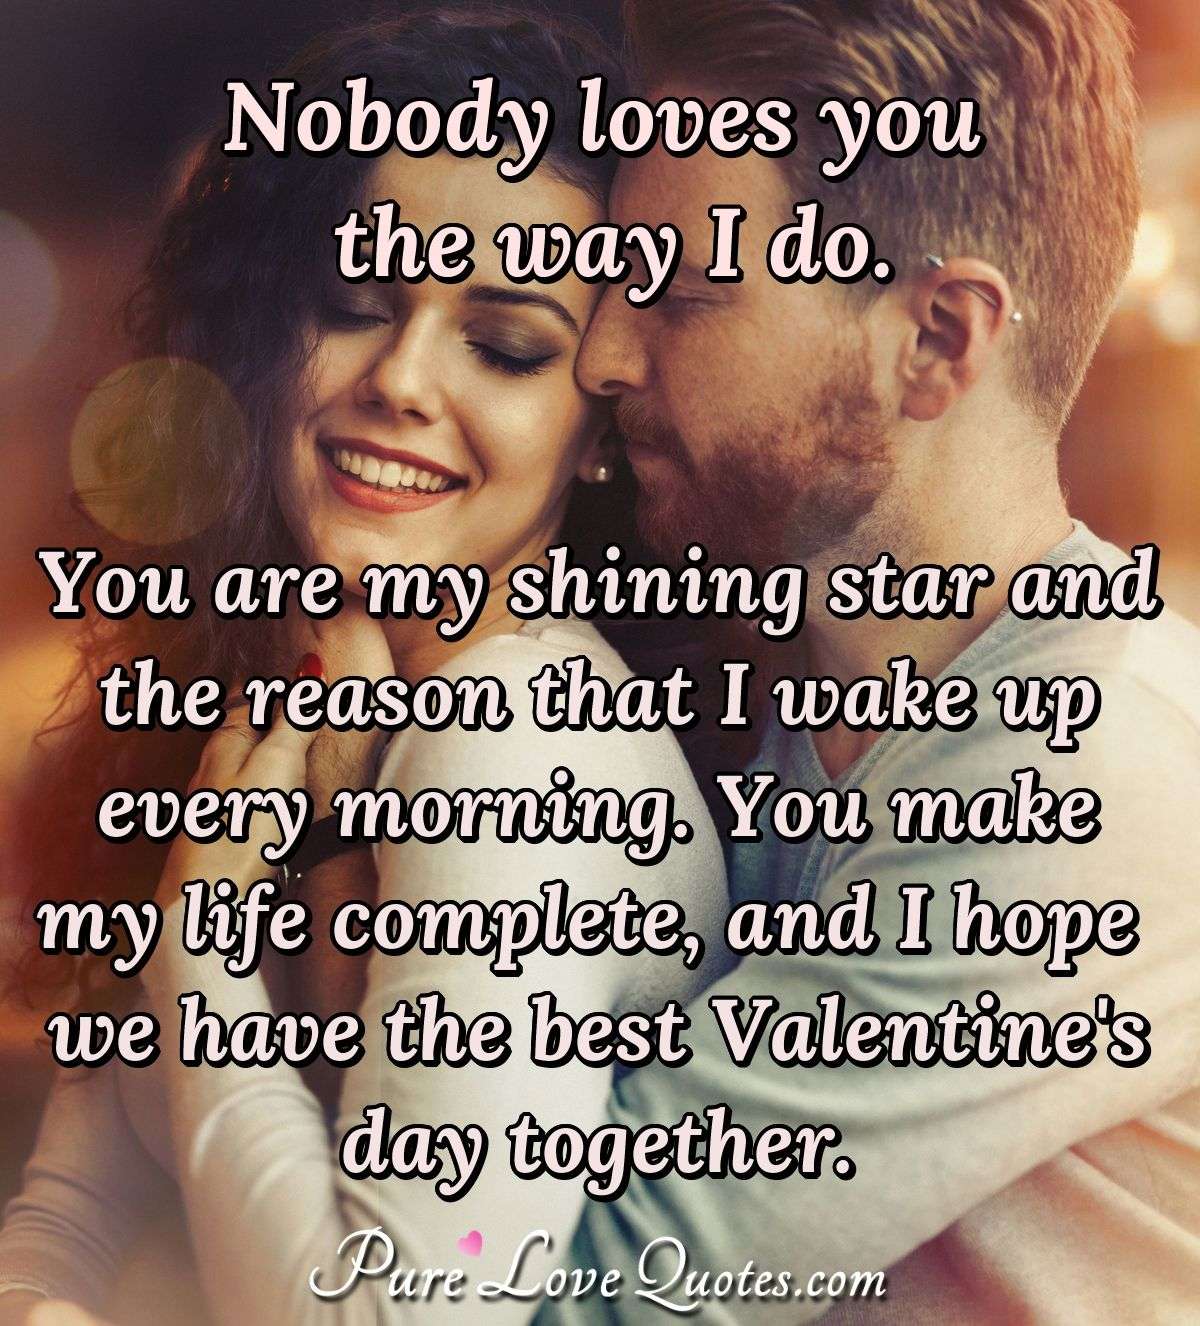 Nobody loves you the way I do. You are my shining star and the reason that I wake up every morning. You make my life complete, and I hope we have the best Valentine's day together. - Anonymous